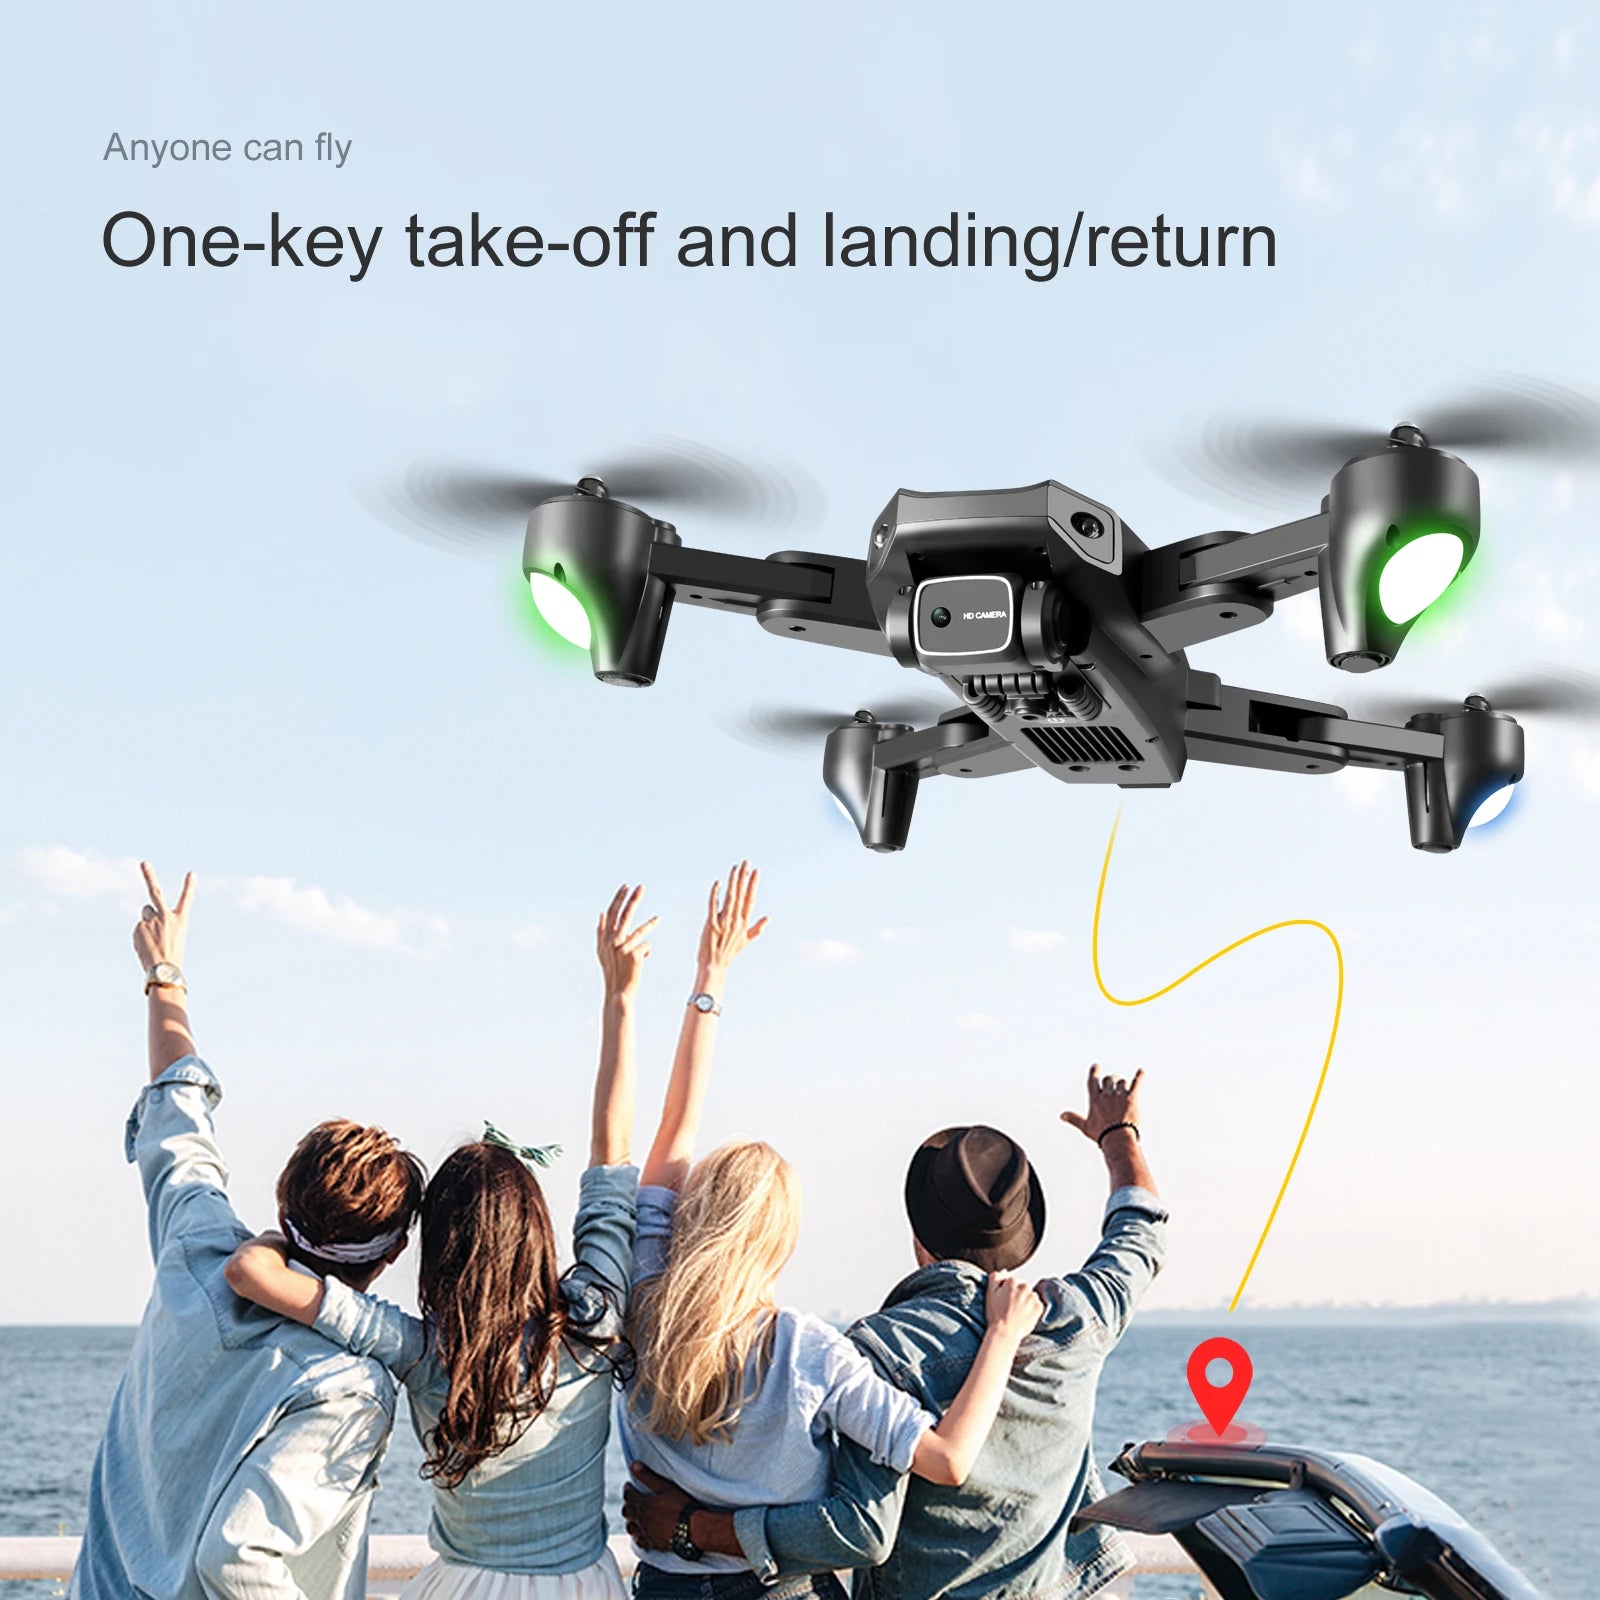 S93 Drone, anyone can fly one-key take-off and landinglreturn